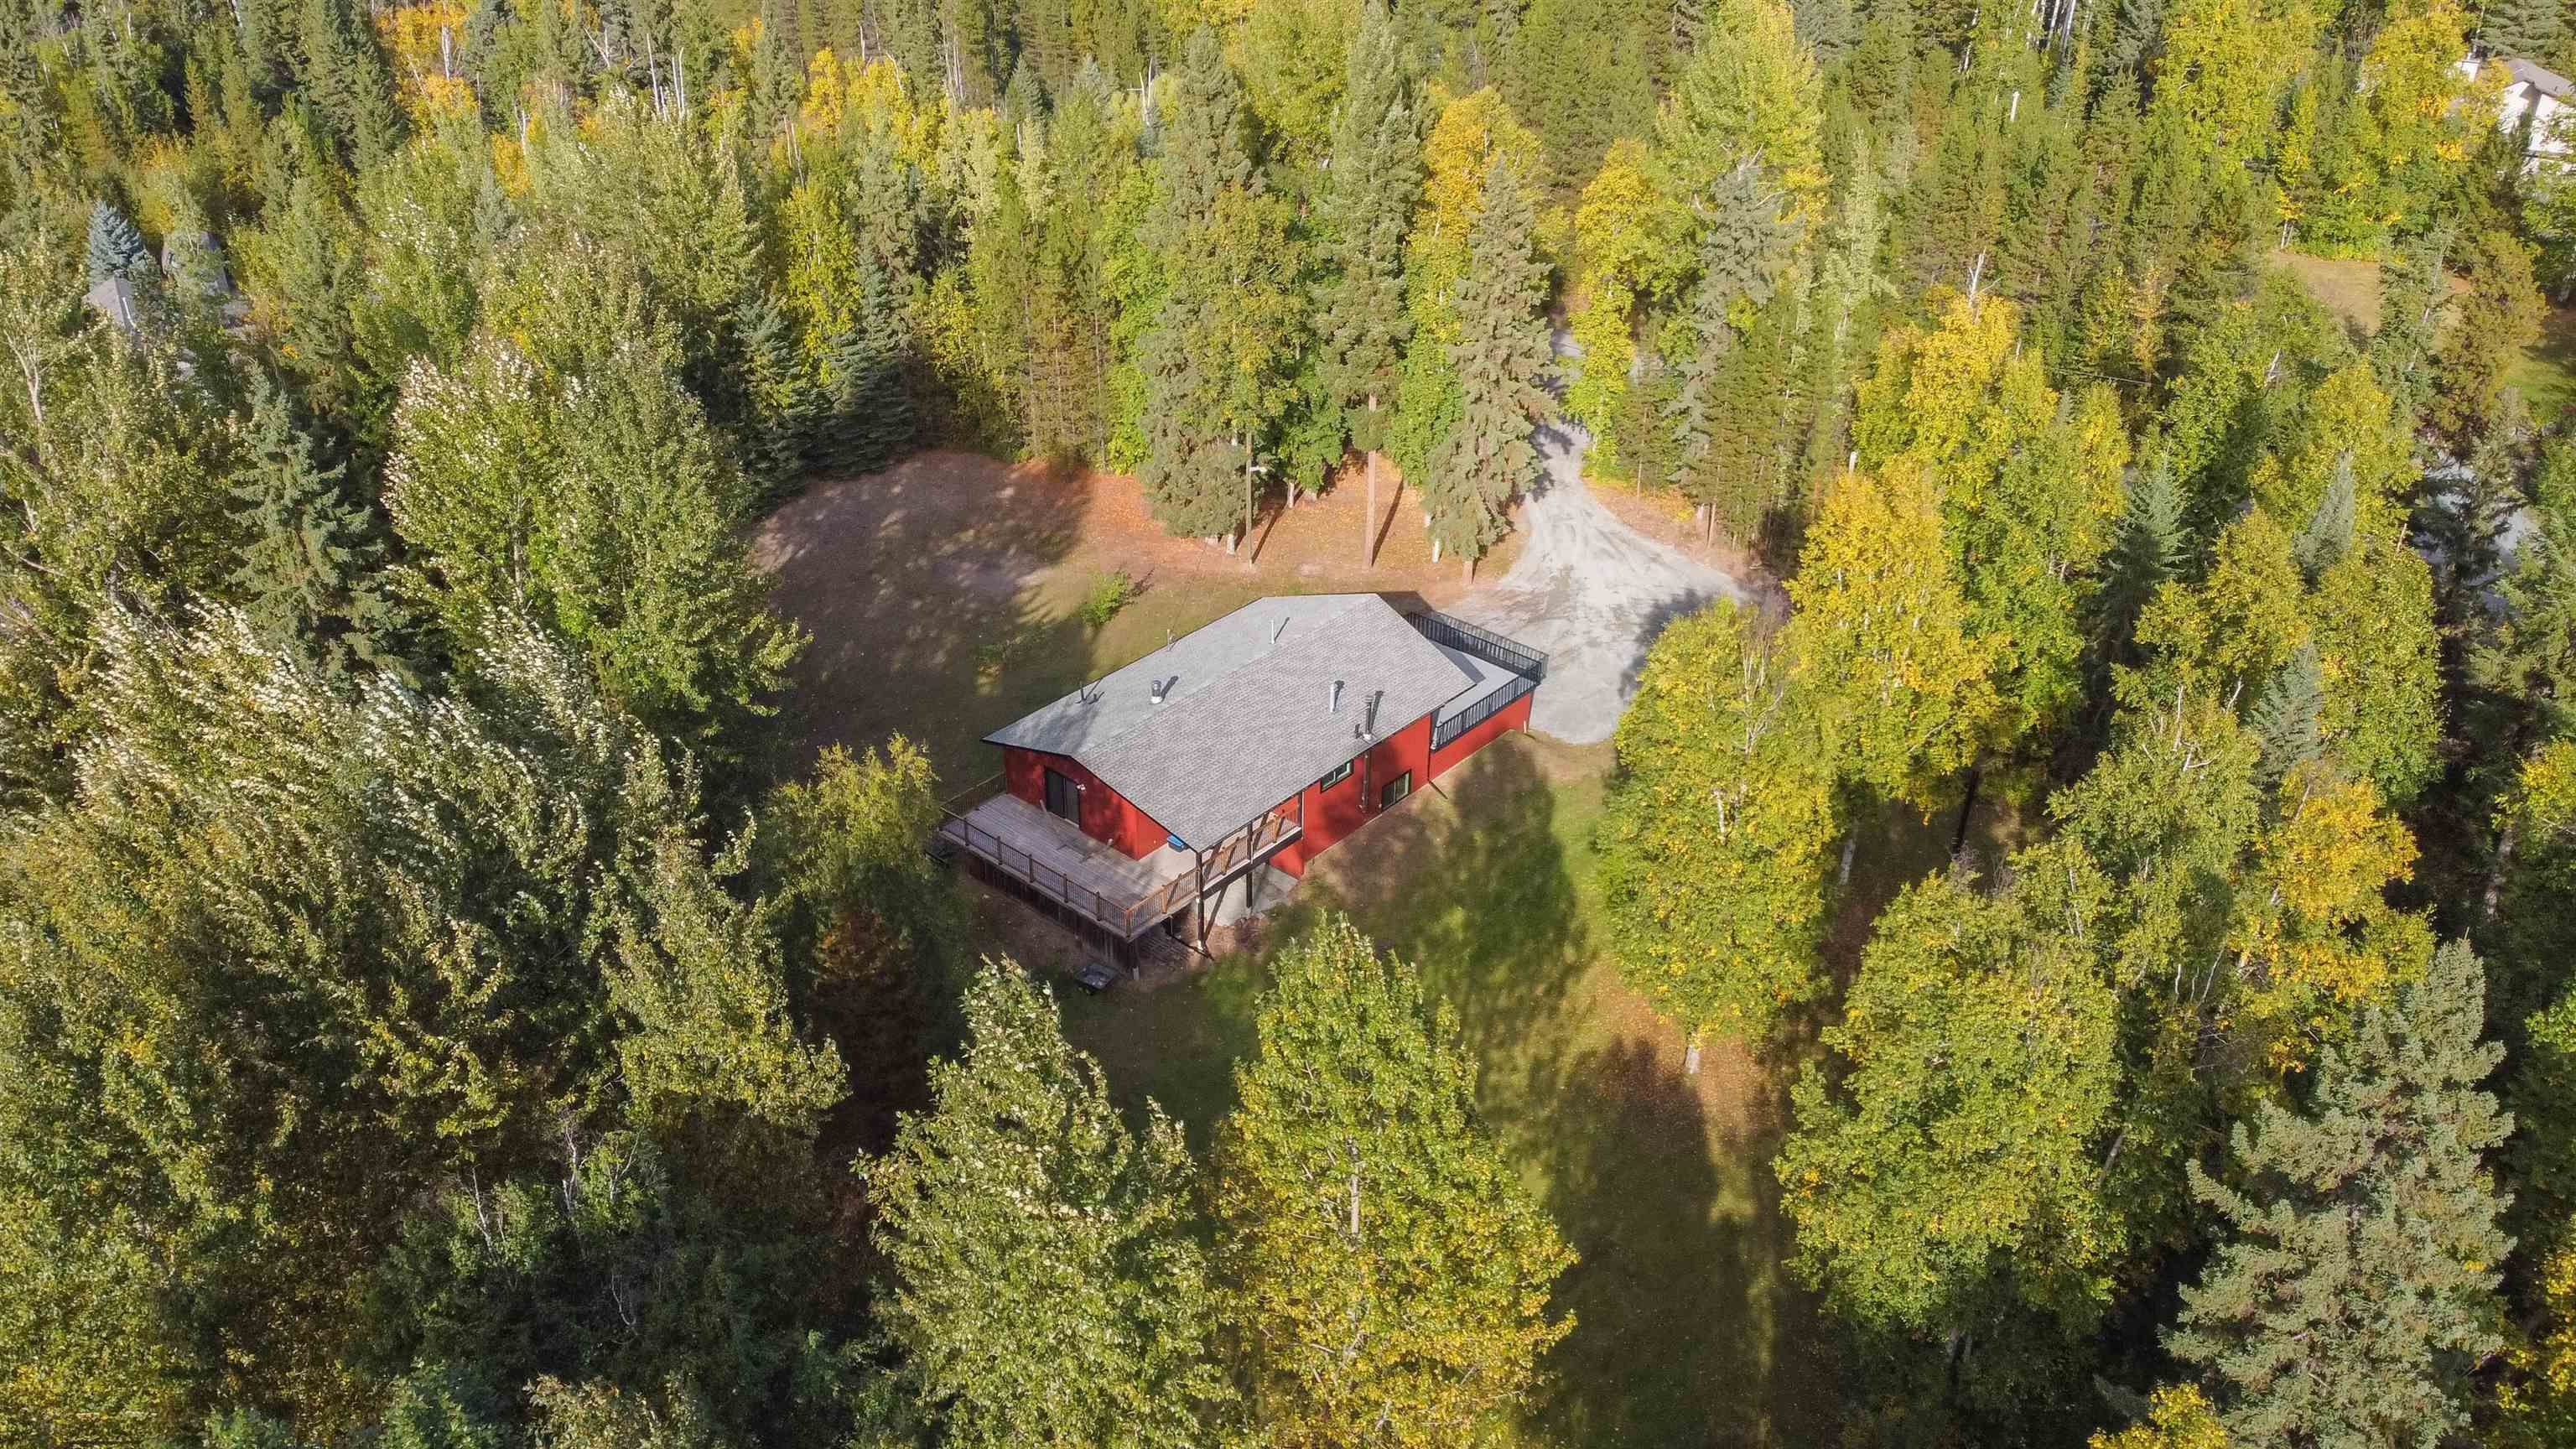 Main Photo: 2715 CATHERINE Drive in Prince George: Miworth House for sale (PG Rural West (Zone 77))  : MLS®# R2618668